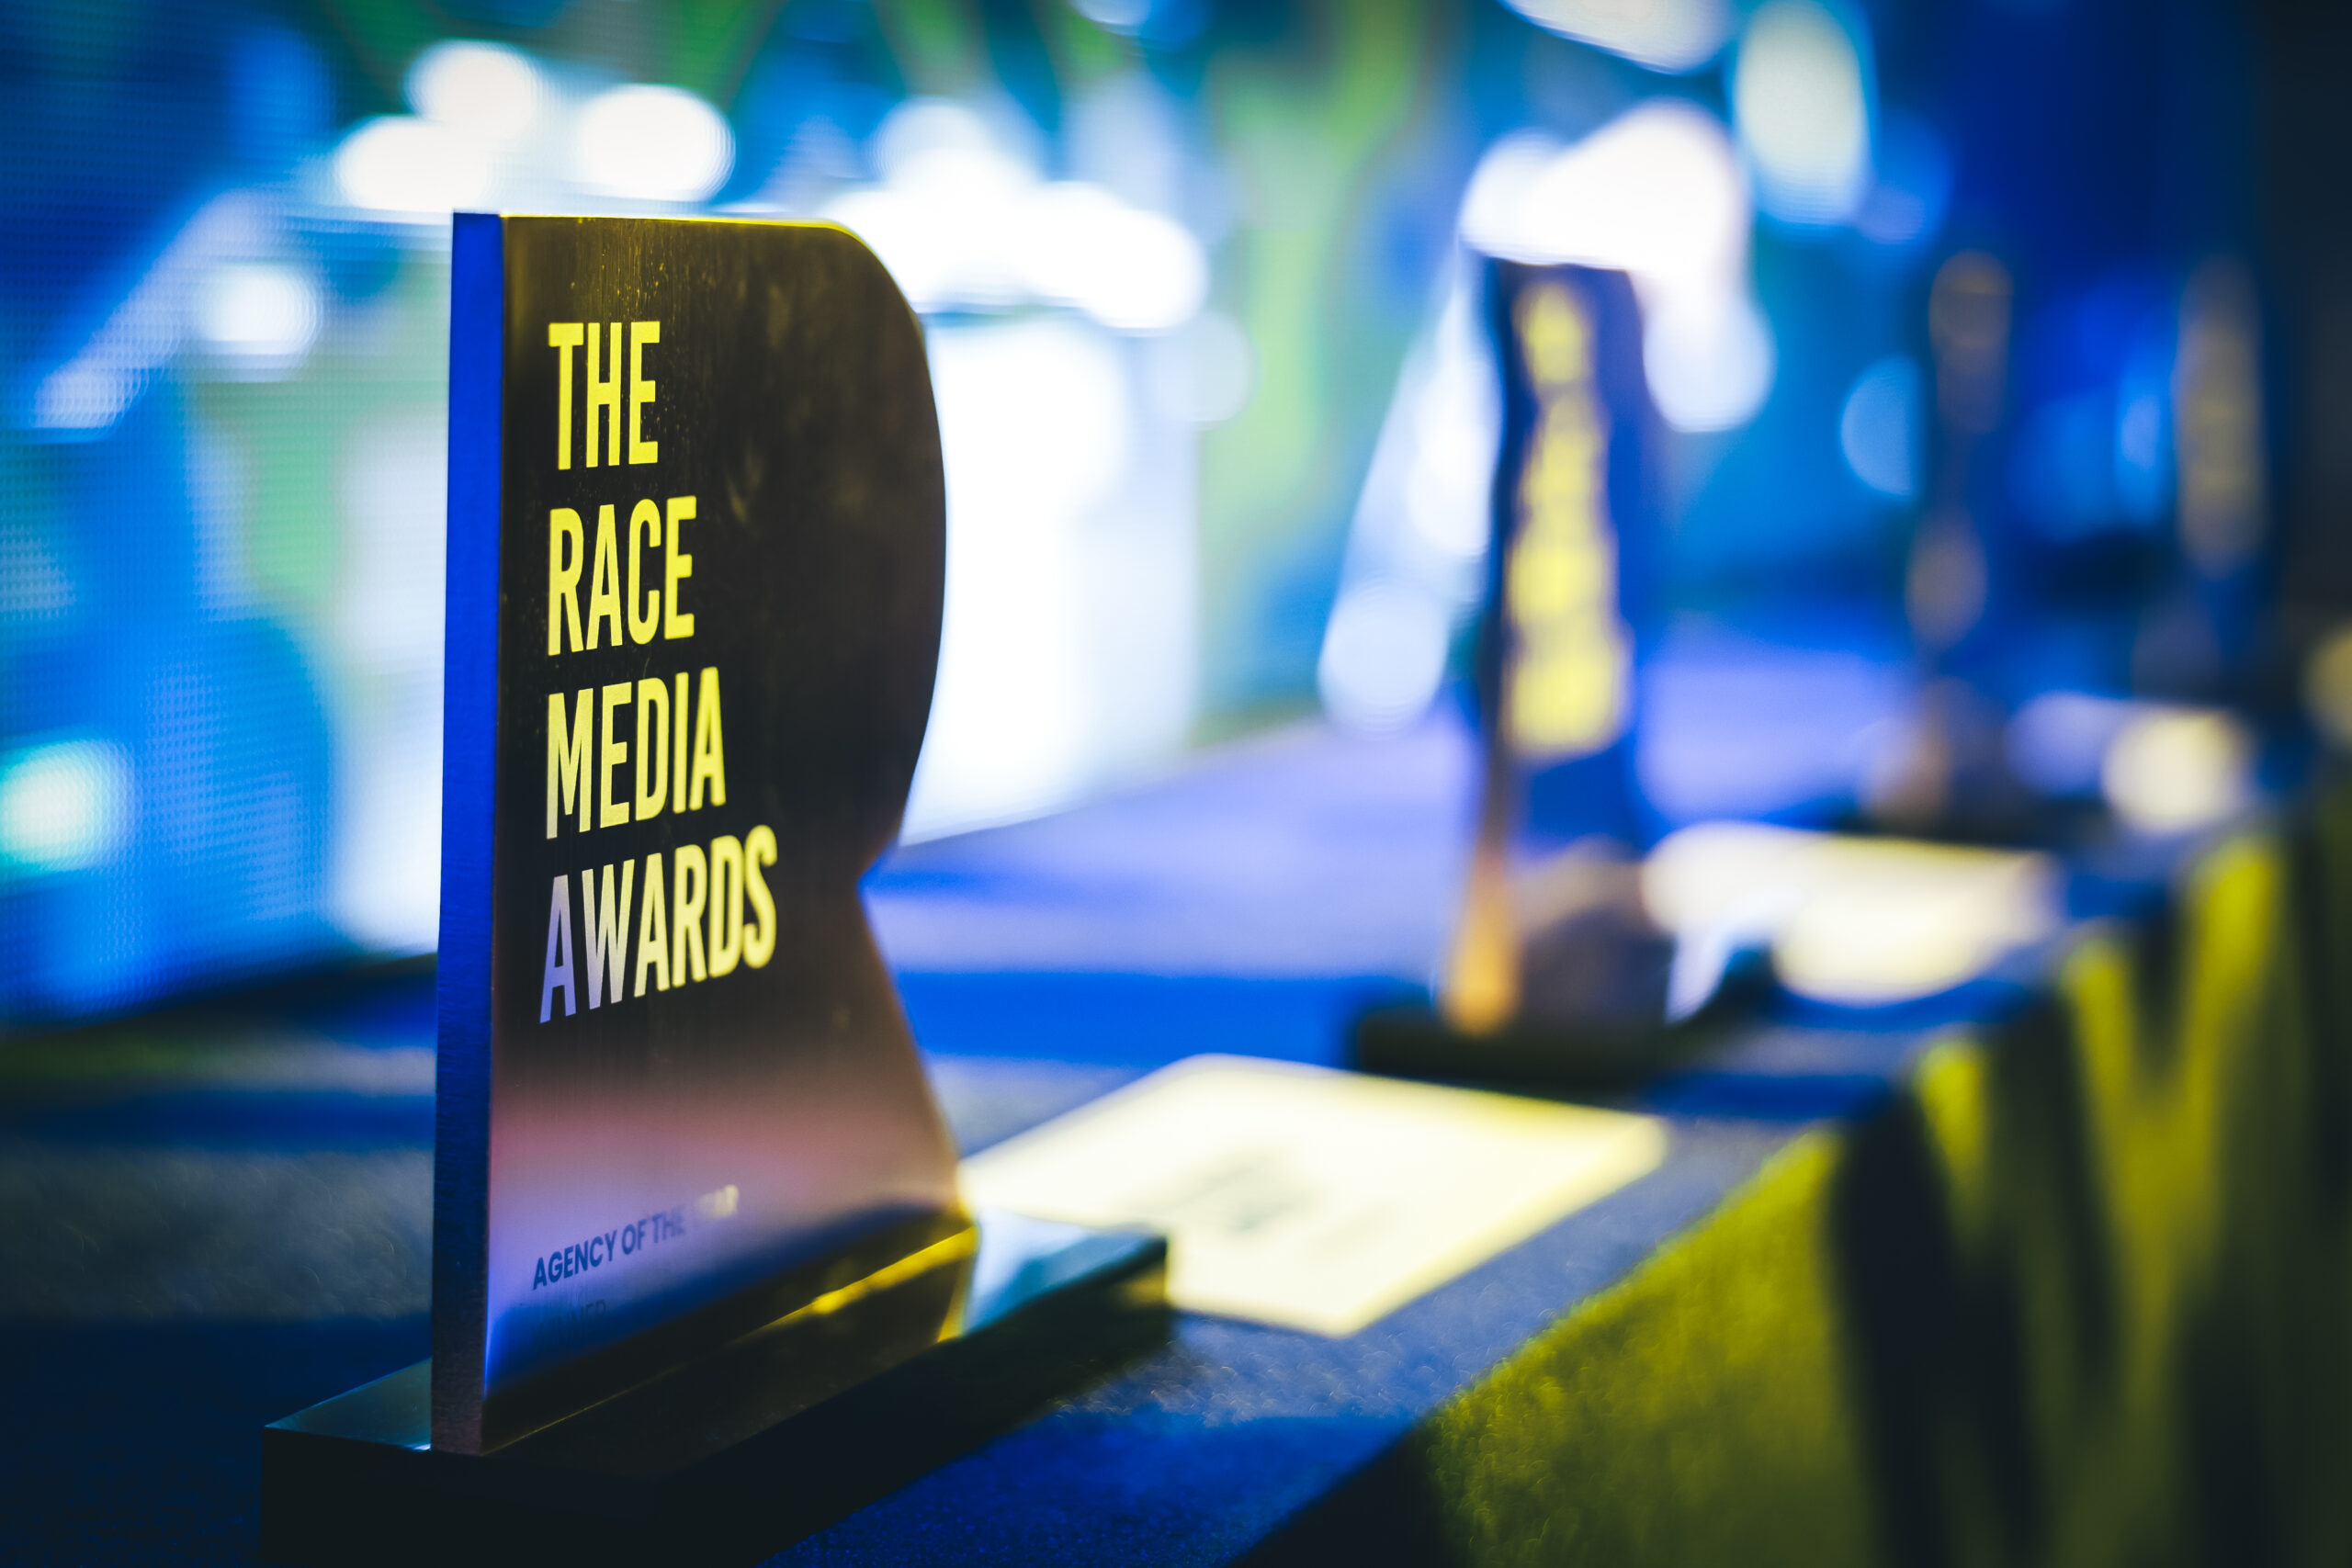 Ten days and counting for final entries for The Race Media Awards